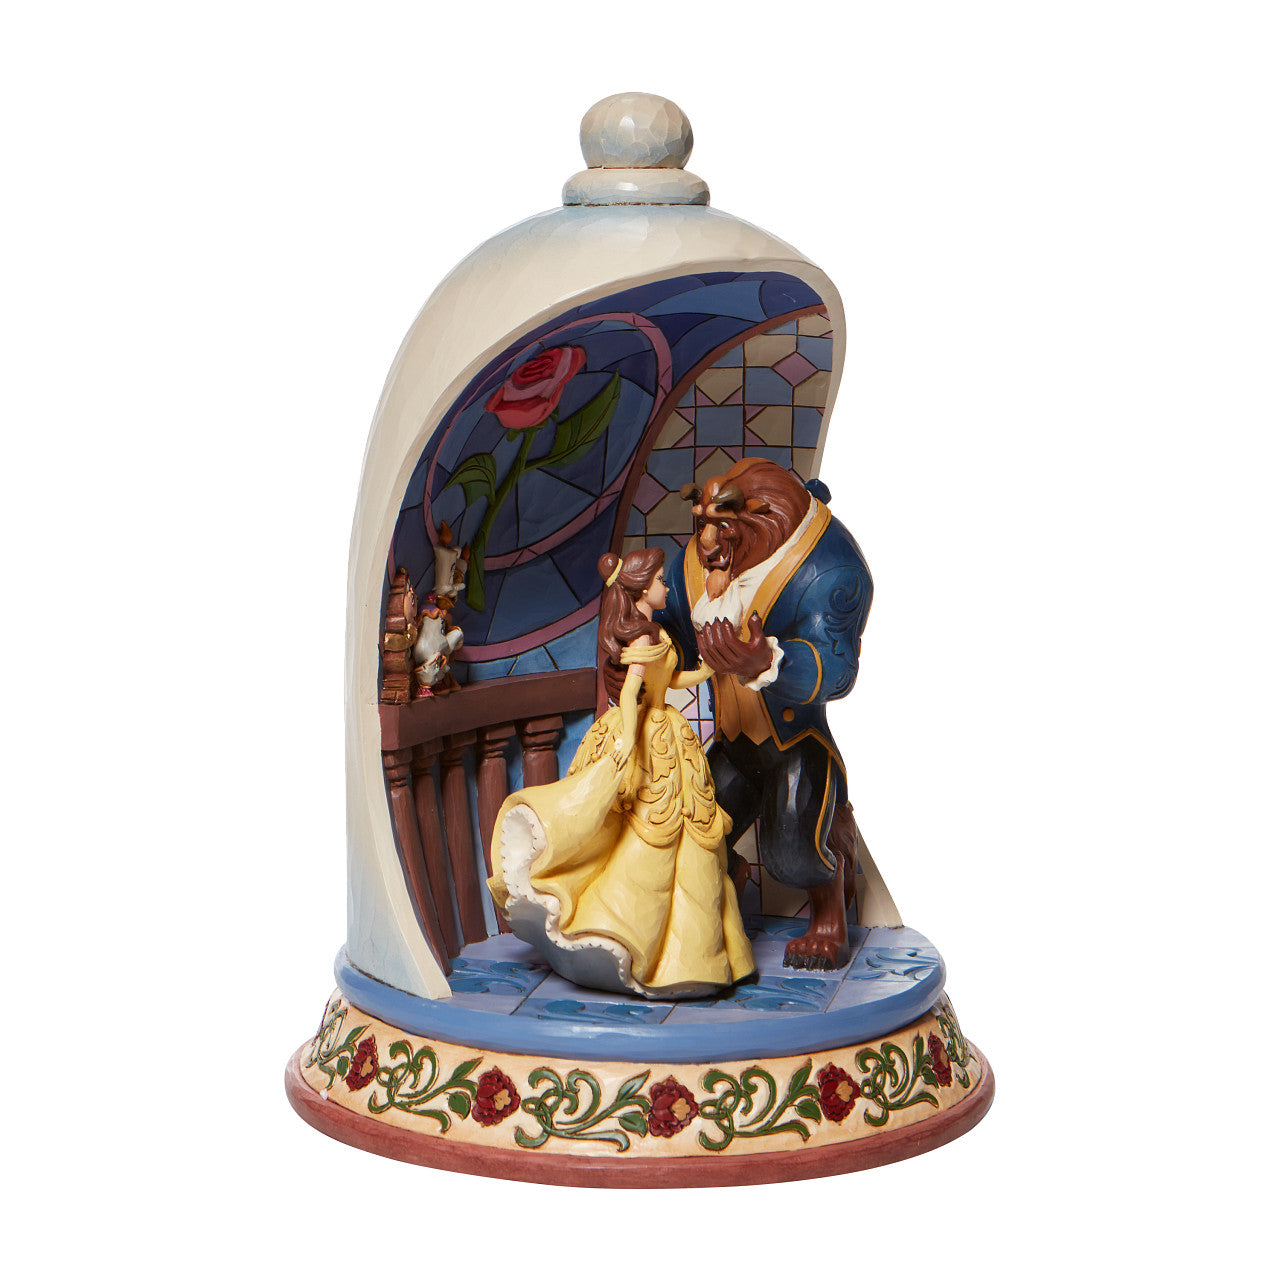 Enchanted Love - Beauty and The Beast Rose Dome